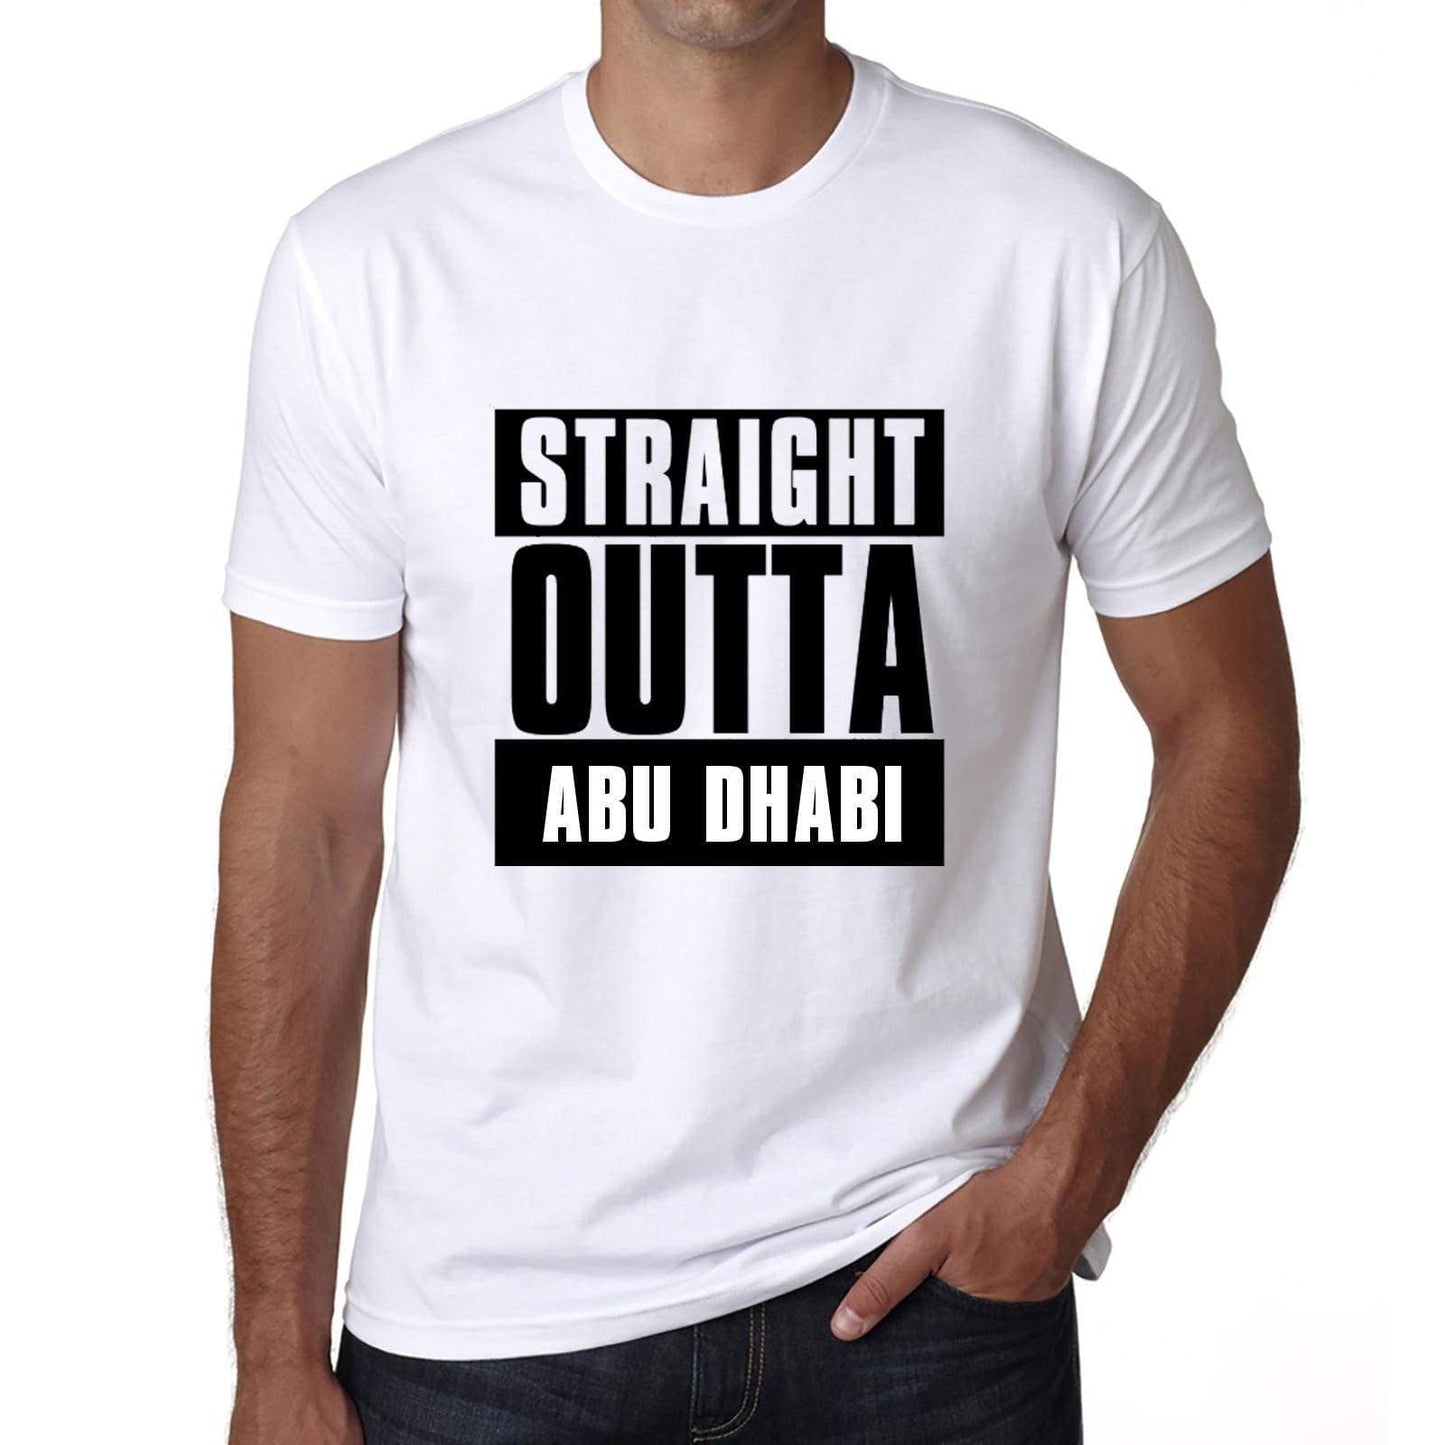 Straight Outta Abu Dhabi Mens Short Sleeve Round Neck T-Shirt 00027 - White / S - Casual